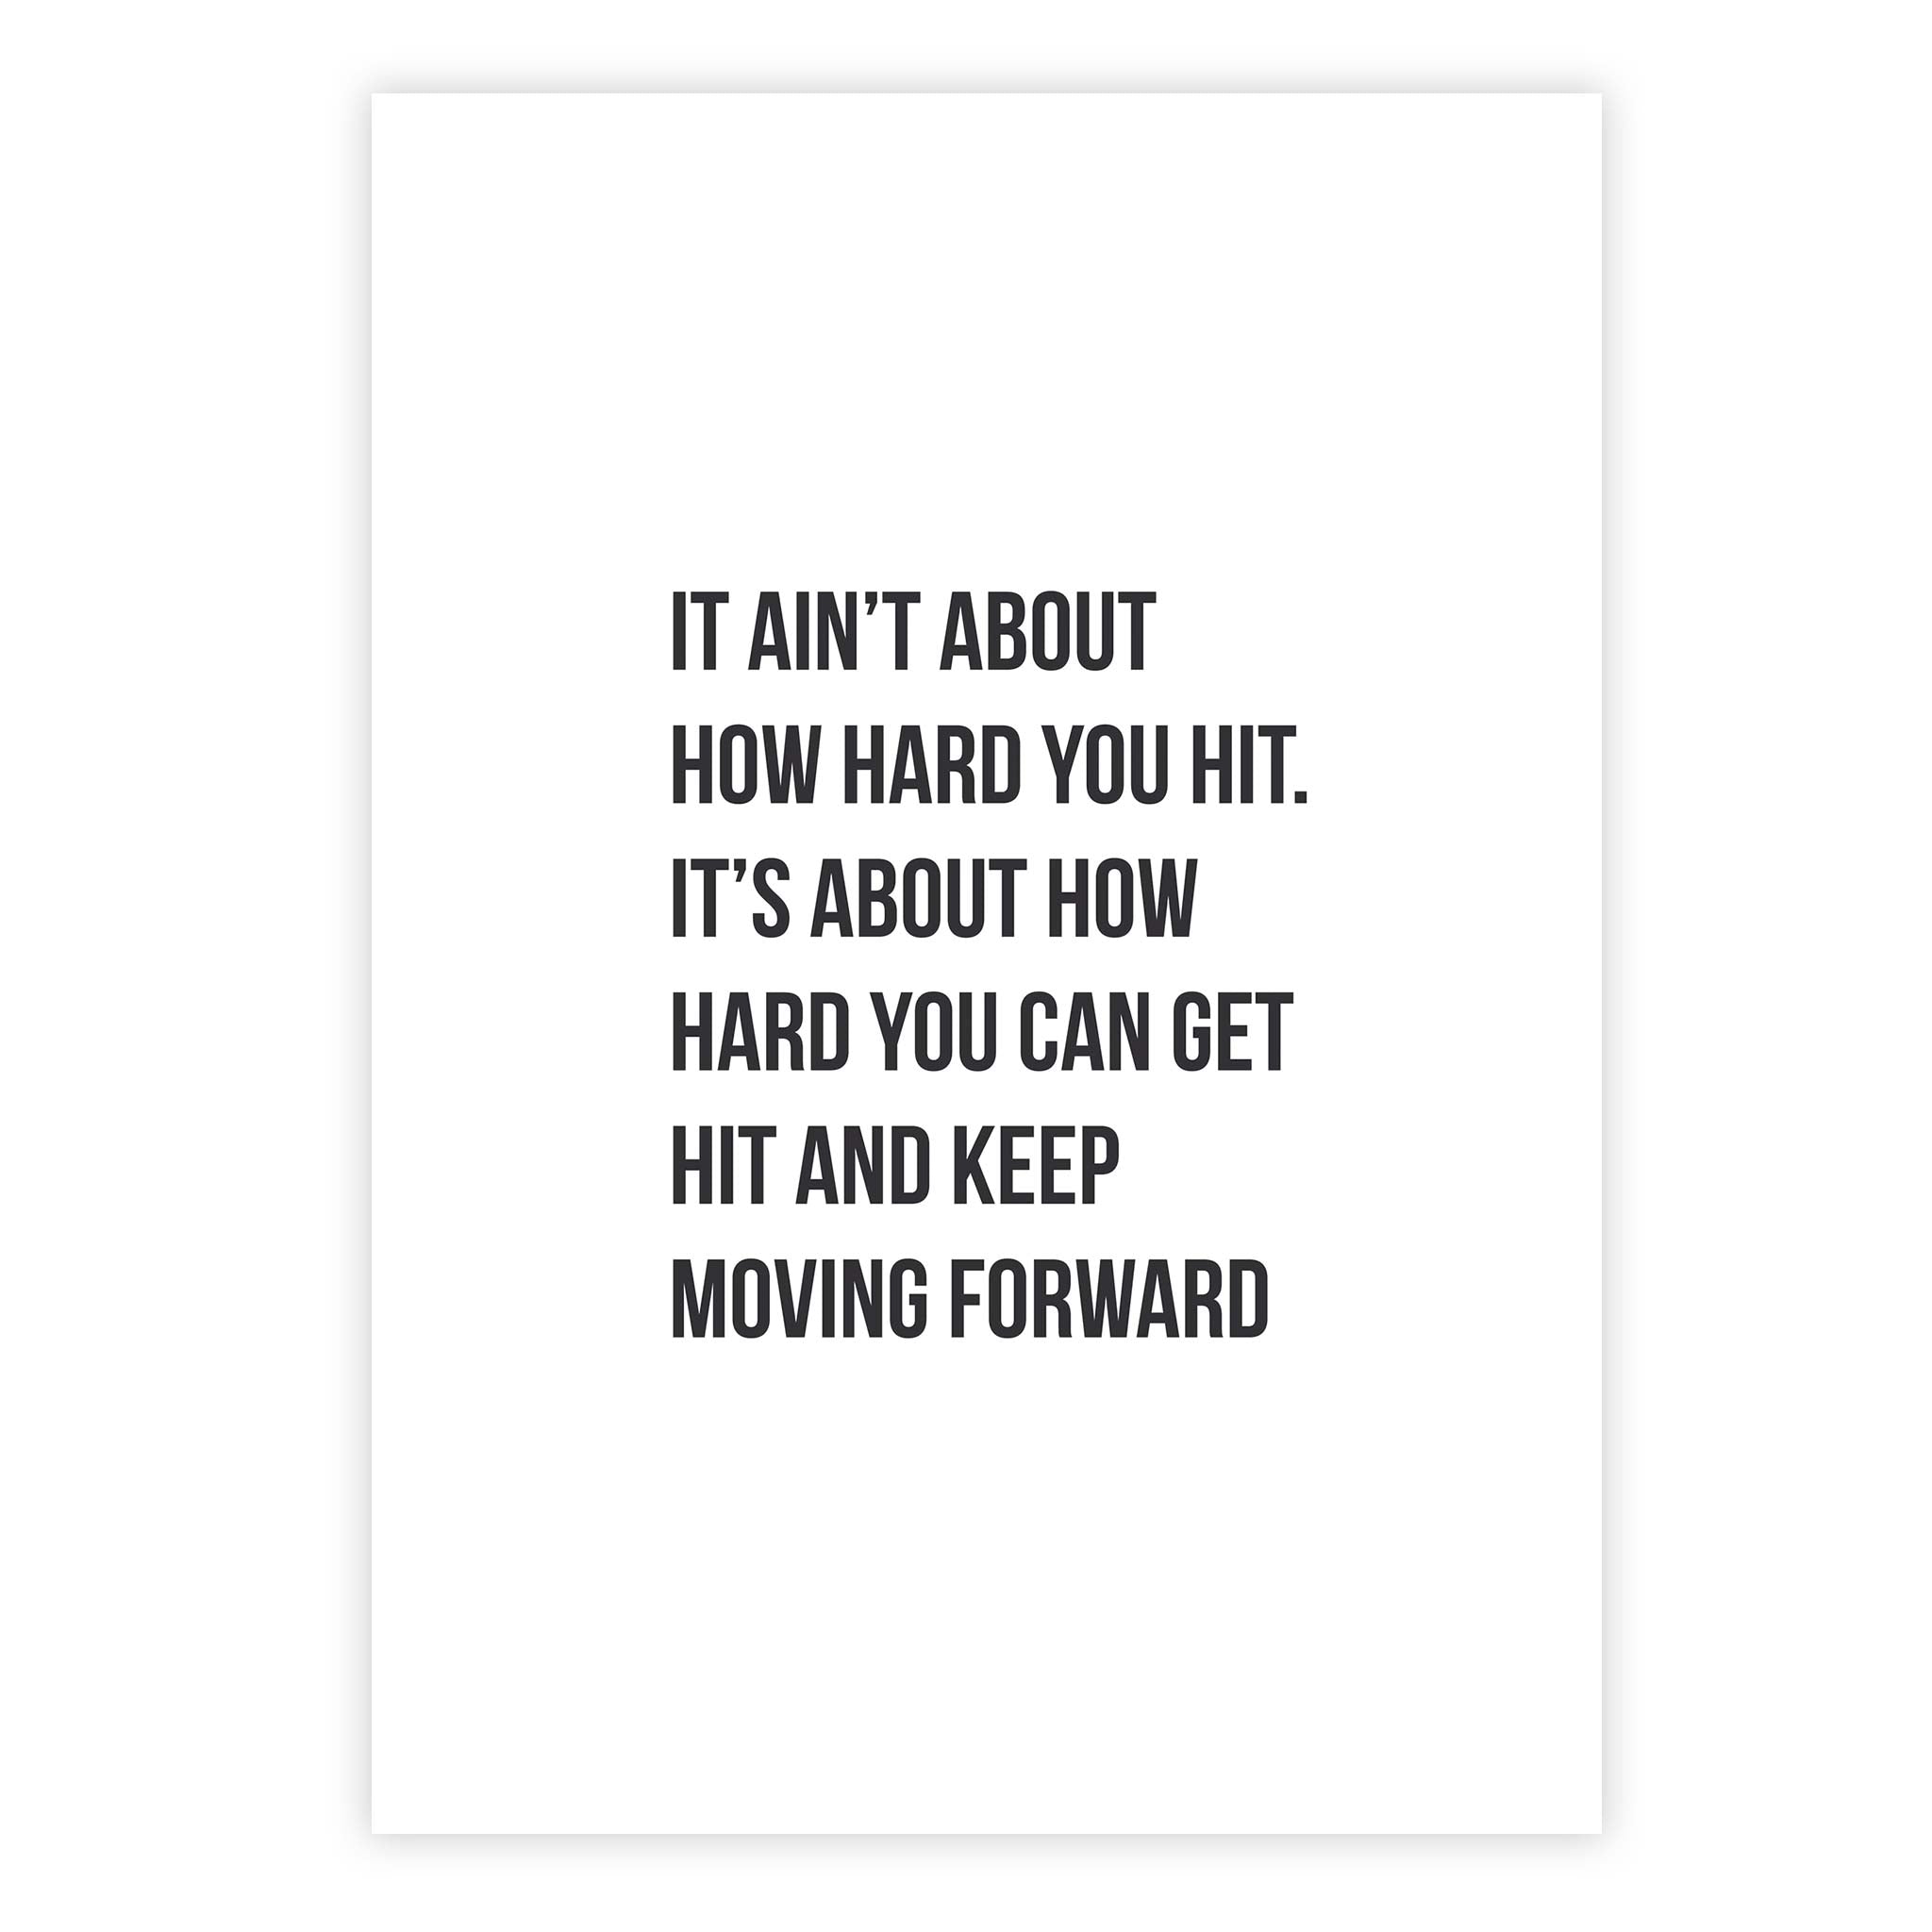 It ain’t about how hard you hit. It’s about how hard you can get hit and keep moving forward